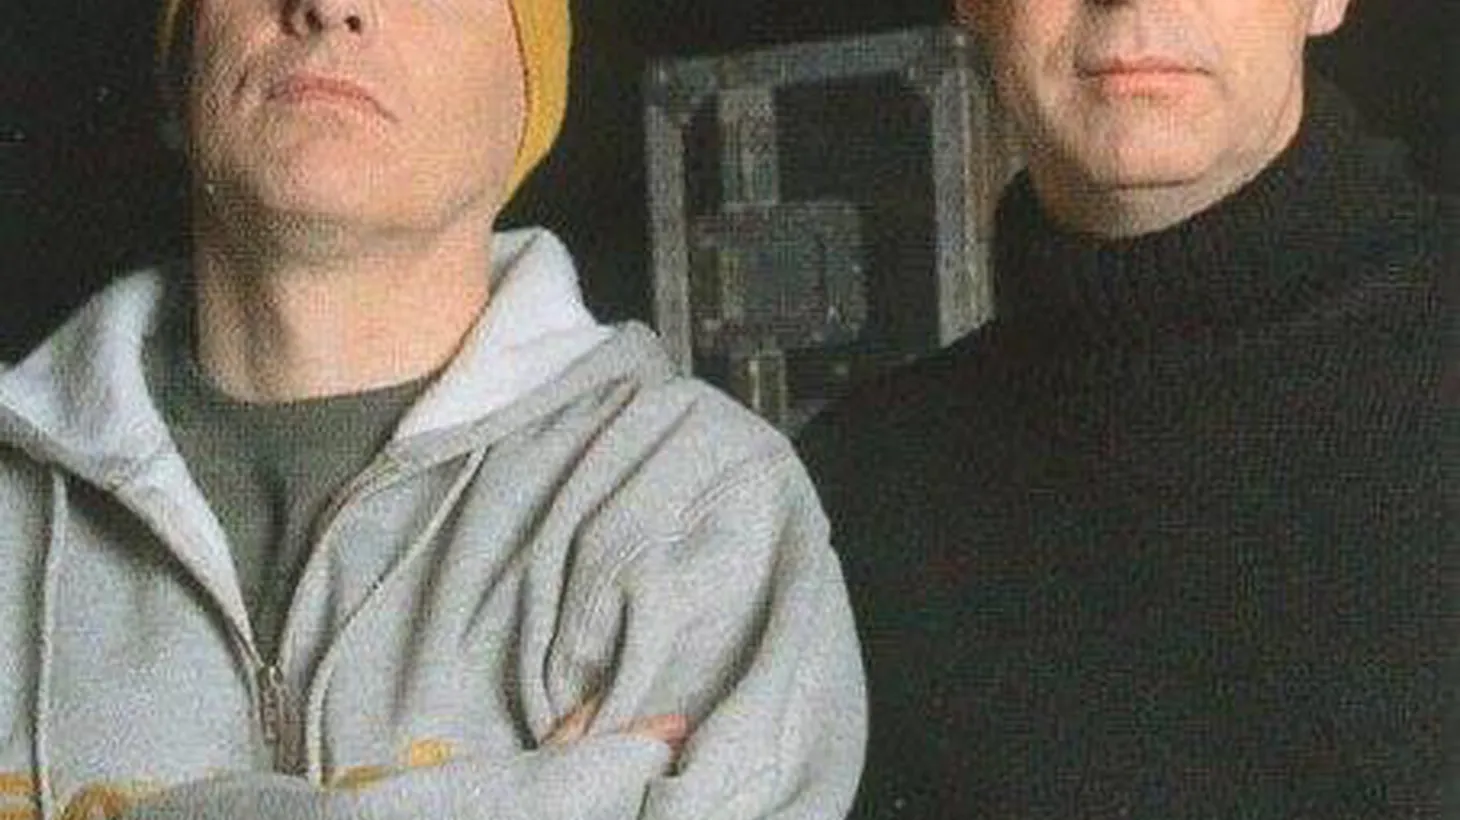 Iconic electro-pop duo Pet Shop Boys finally make their Morning Becomes Eclectic debut at 11:15am.